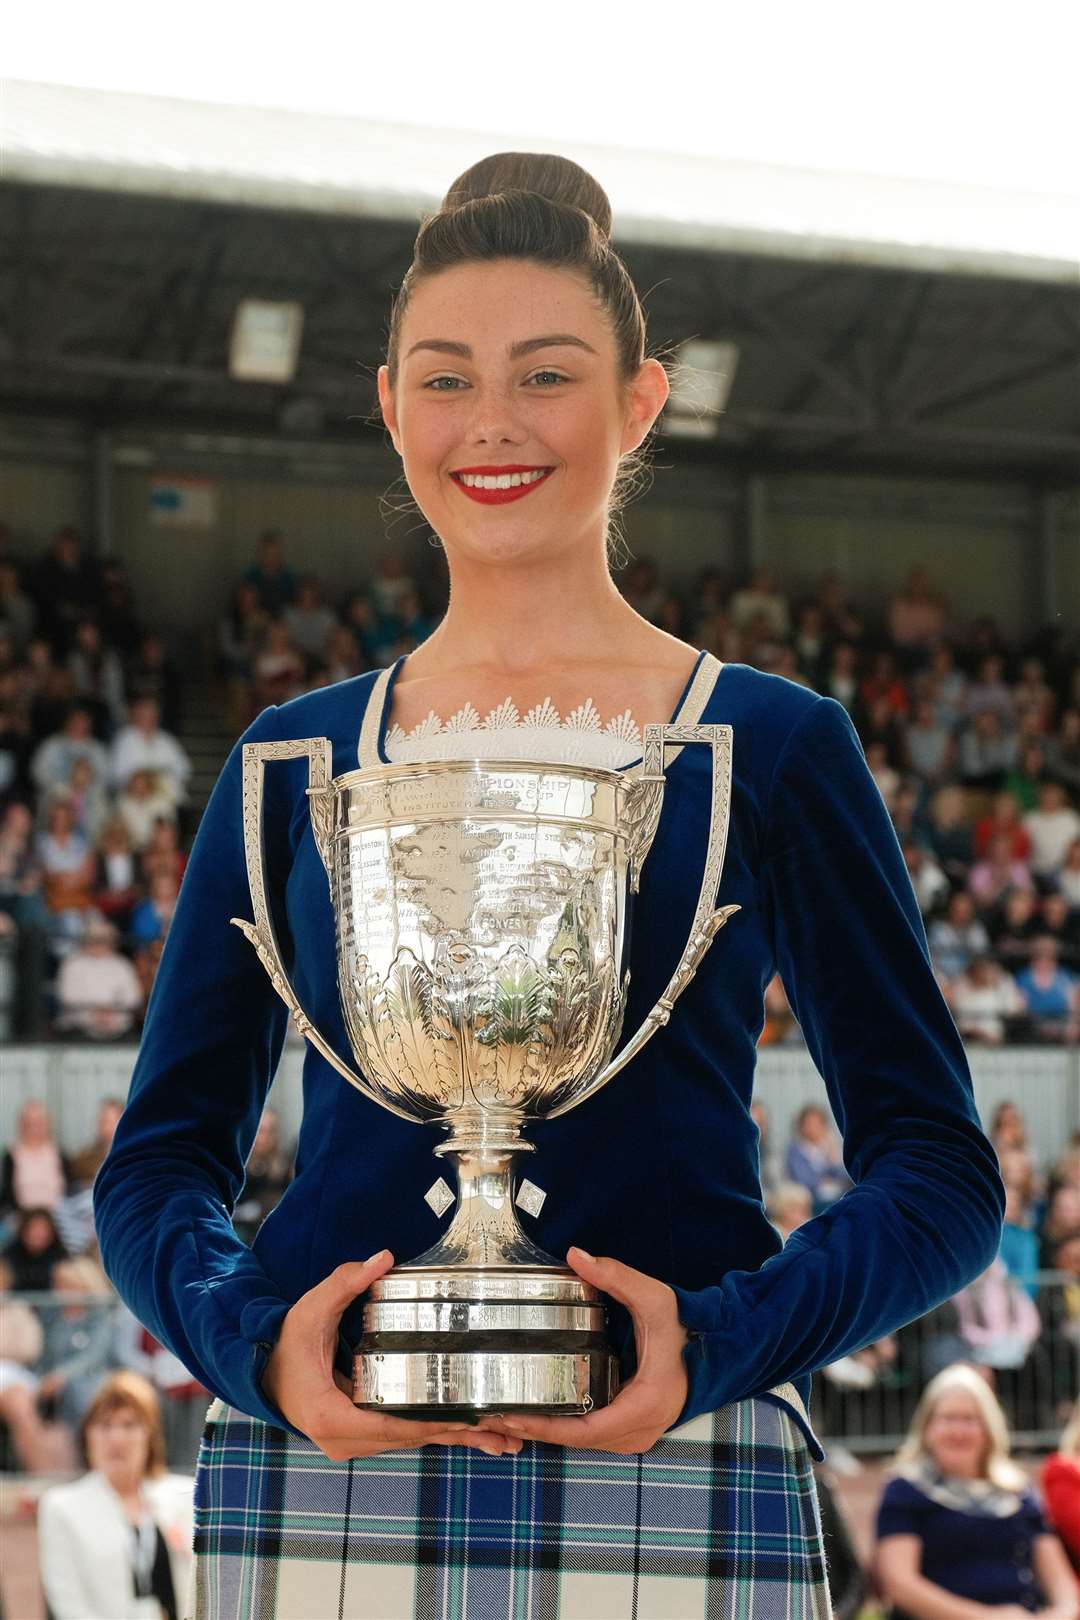 Lily Kelman, world champion Highland dancer. Pic by Ronnie Cairns